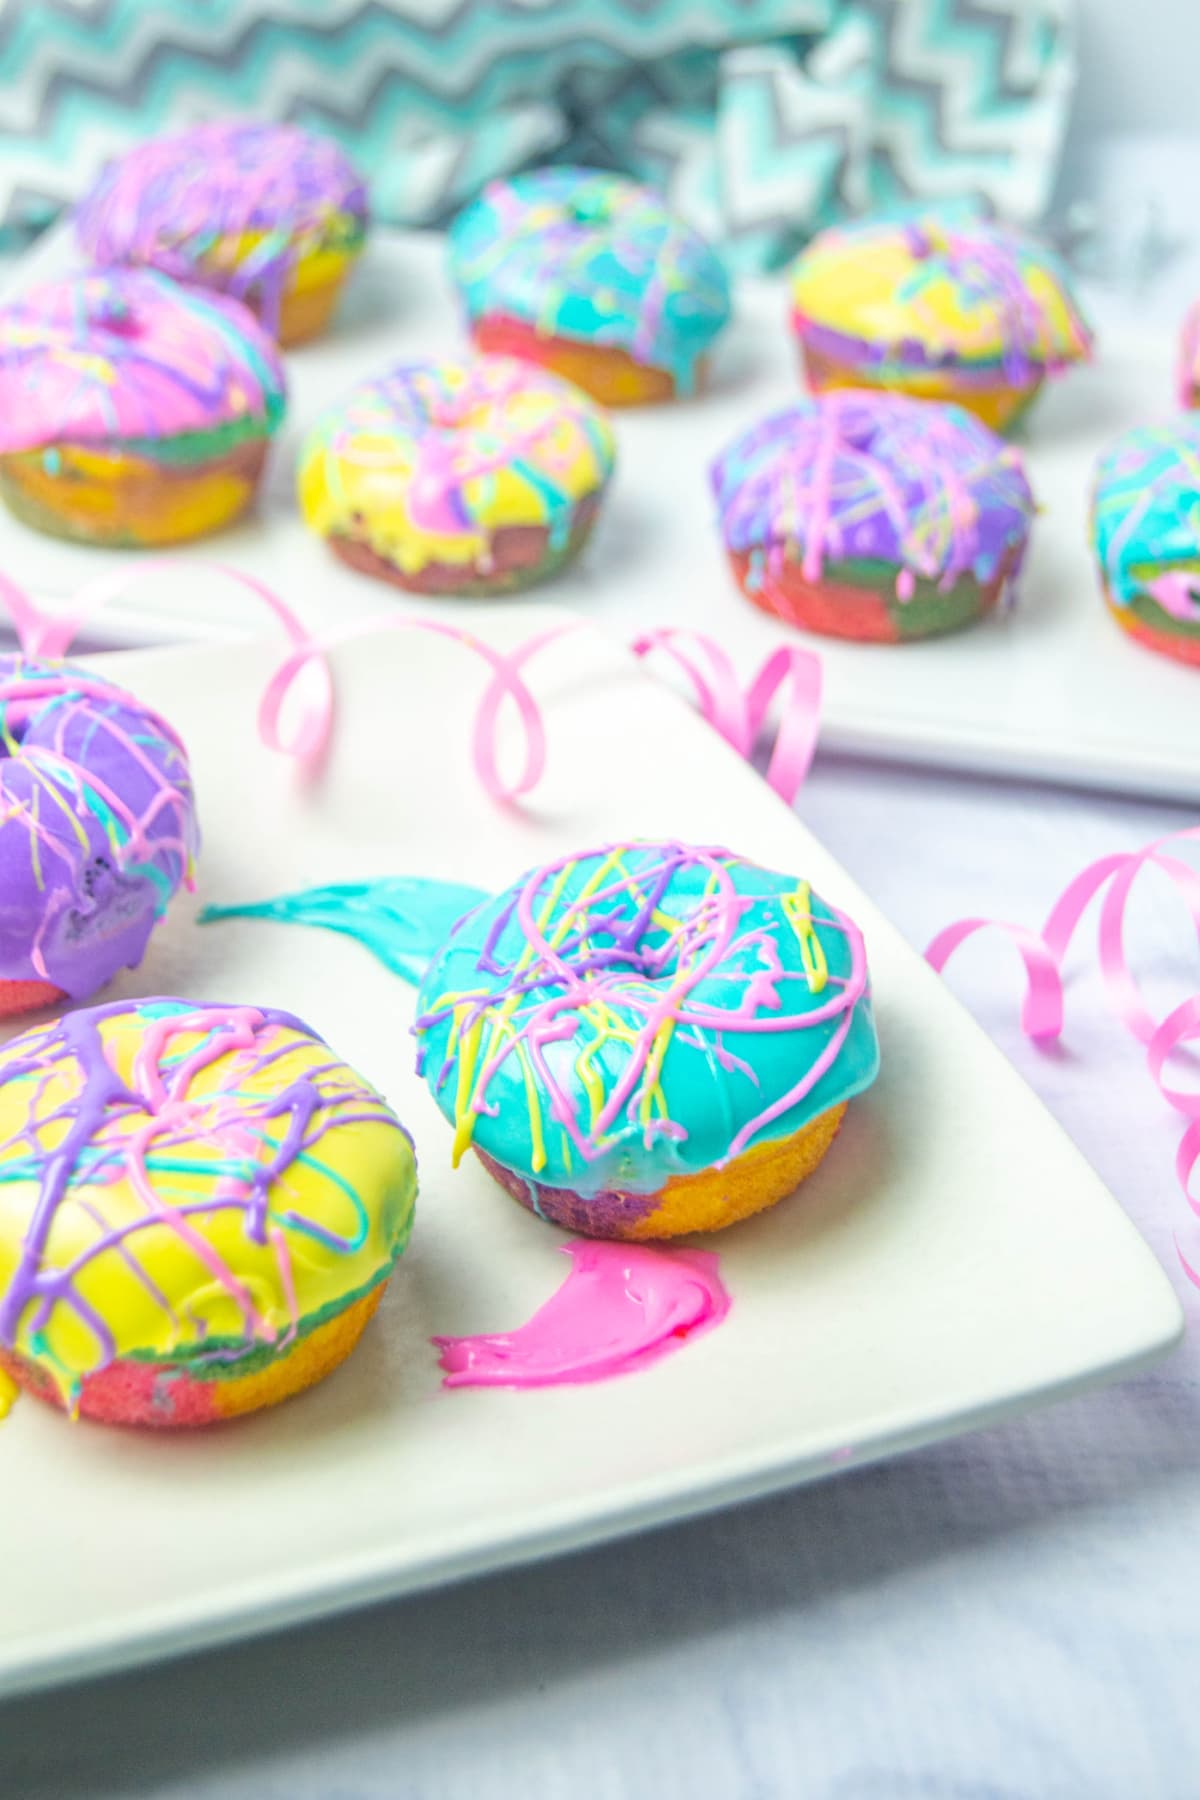 Colorful donuts on white plate